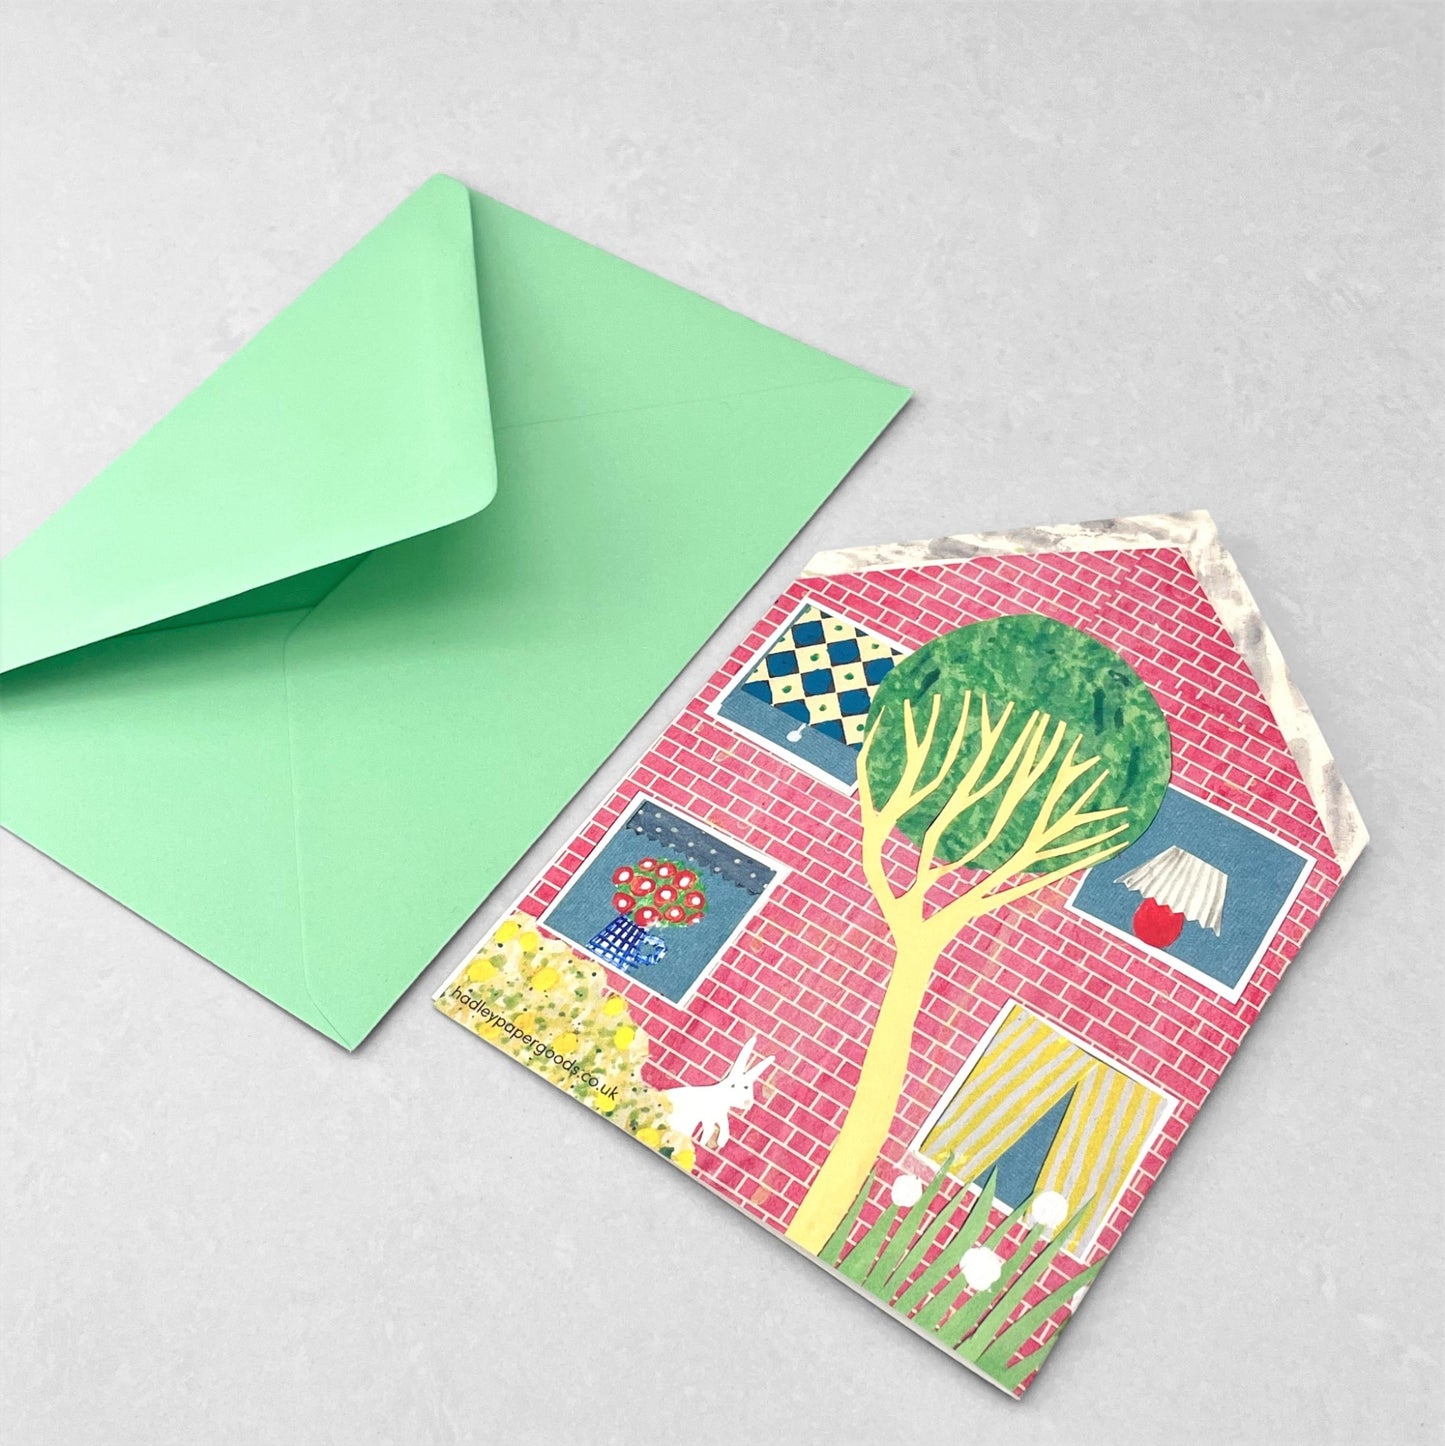 shaped greetings card of a house with four windows and a yellow door by Hadley Paper Goods